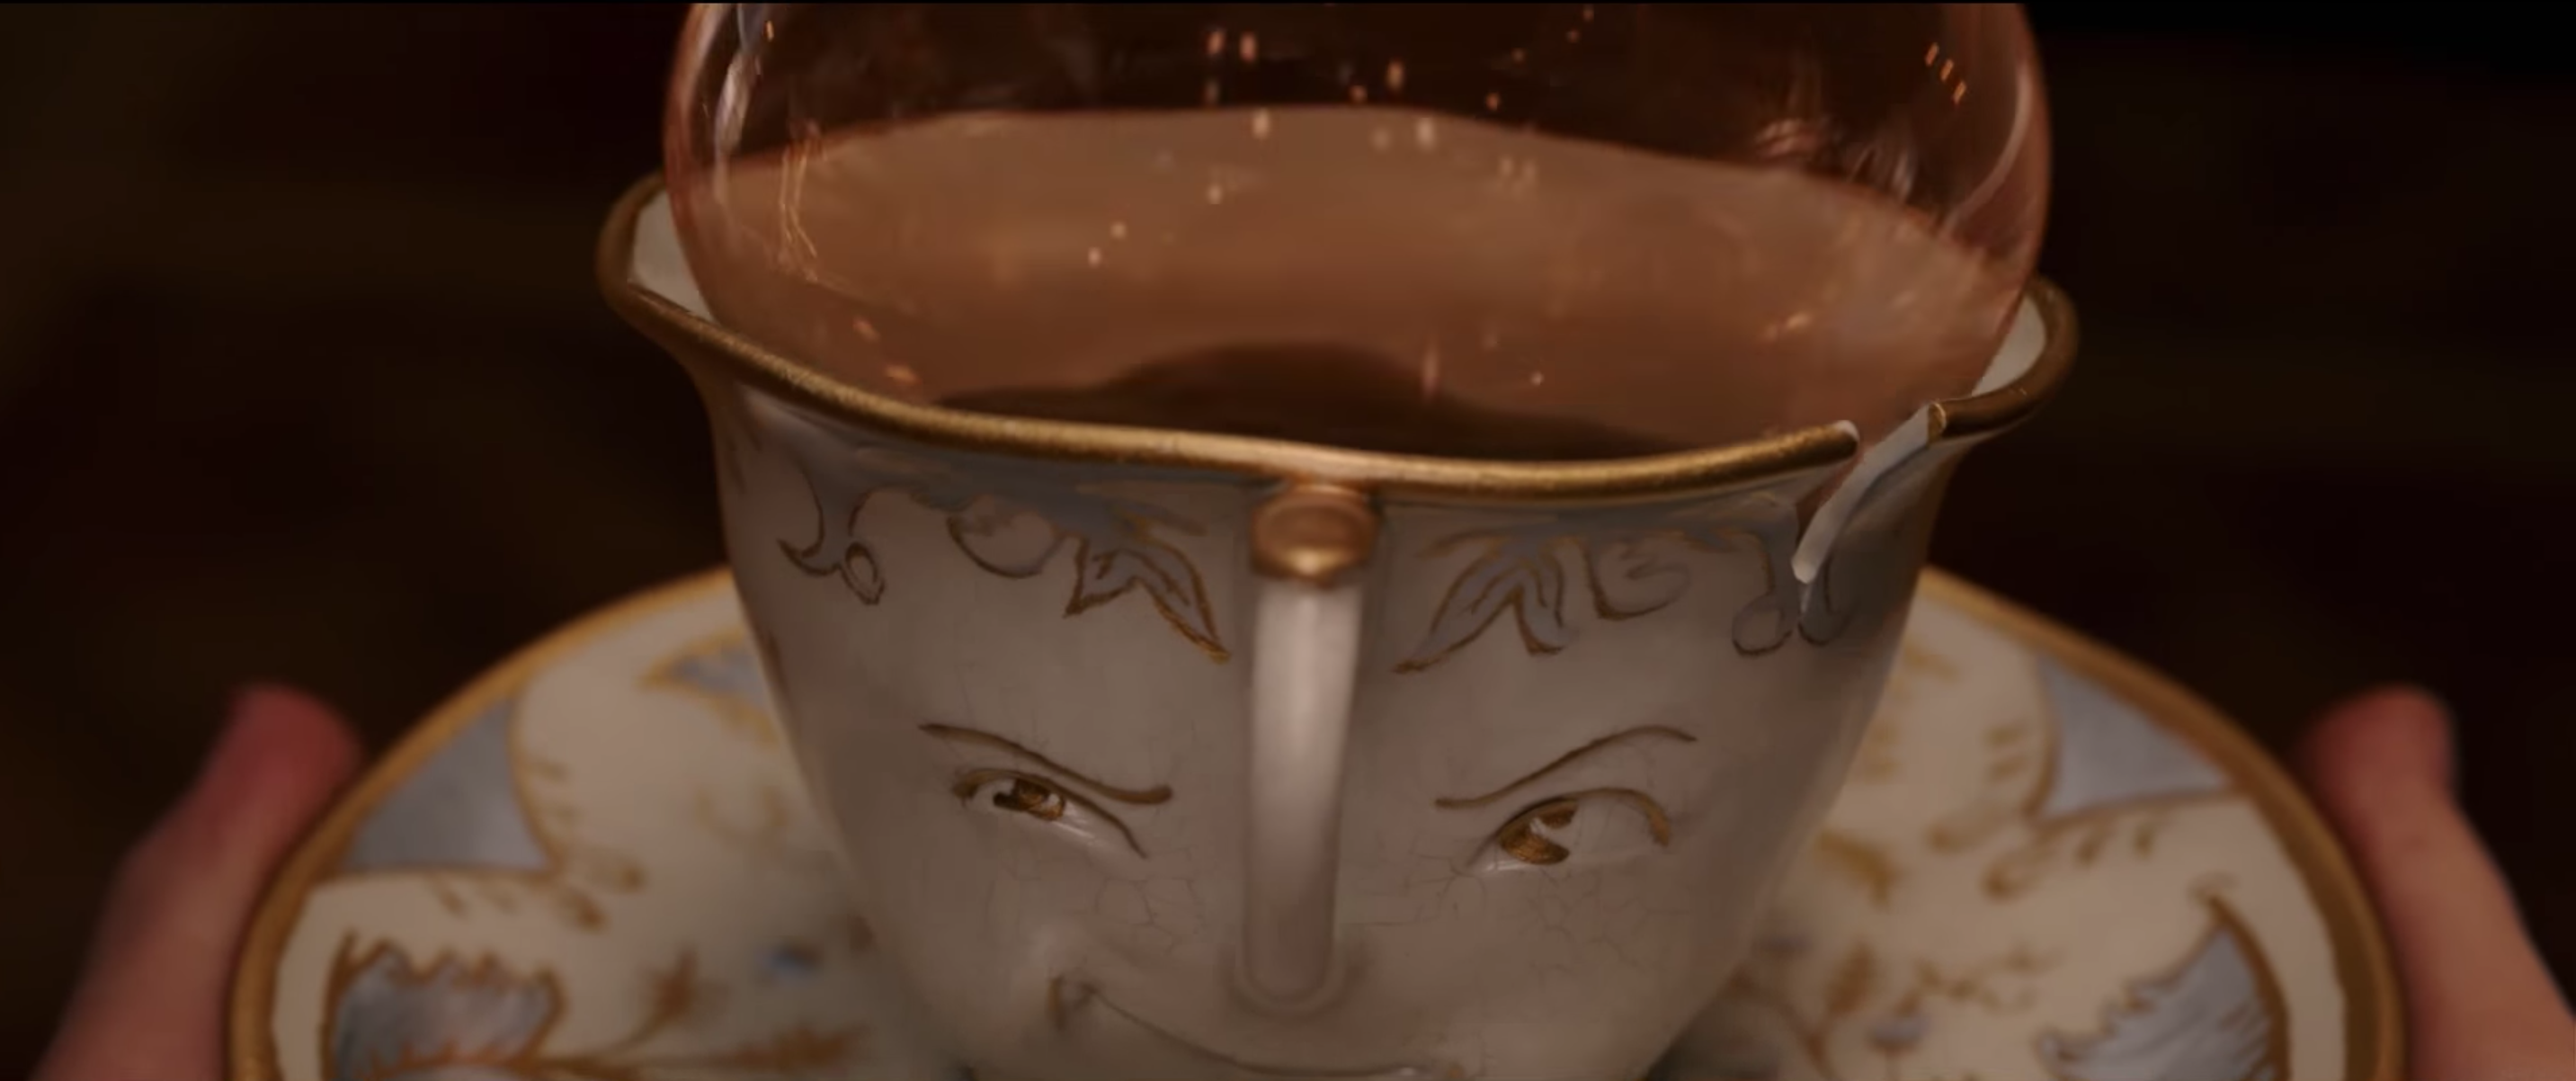 Chip Teacup bubbles- Beauty and The Beast Rental